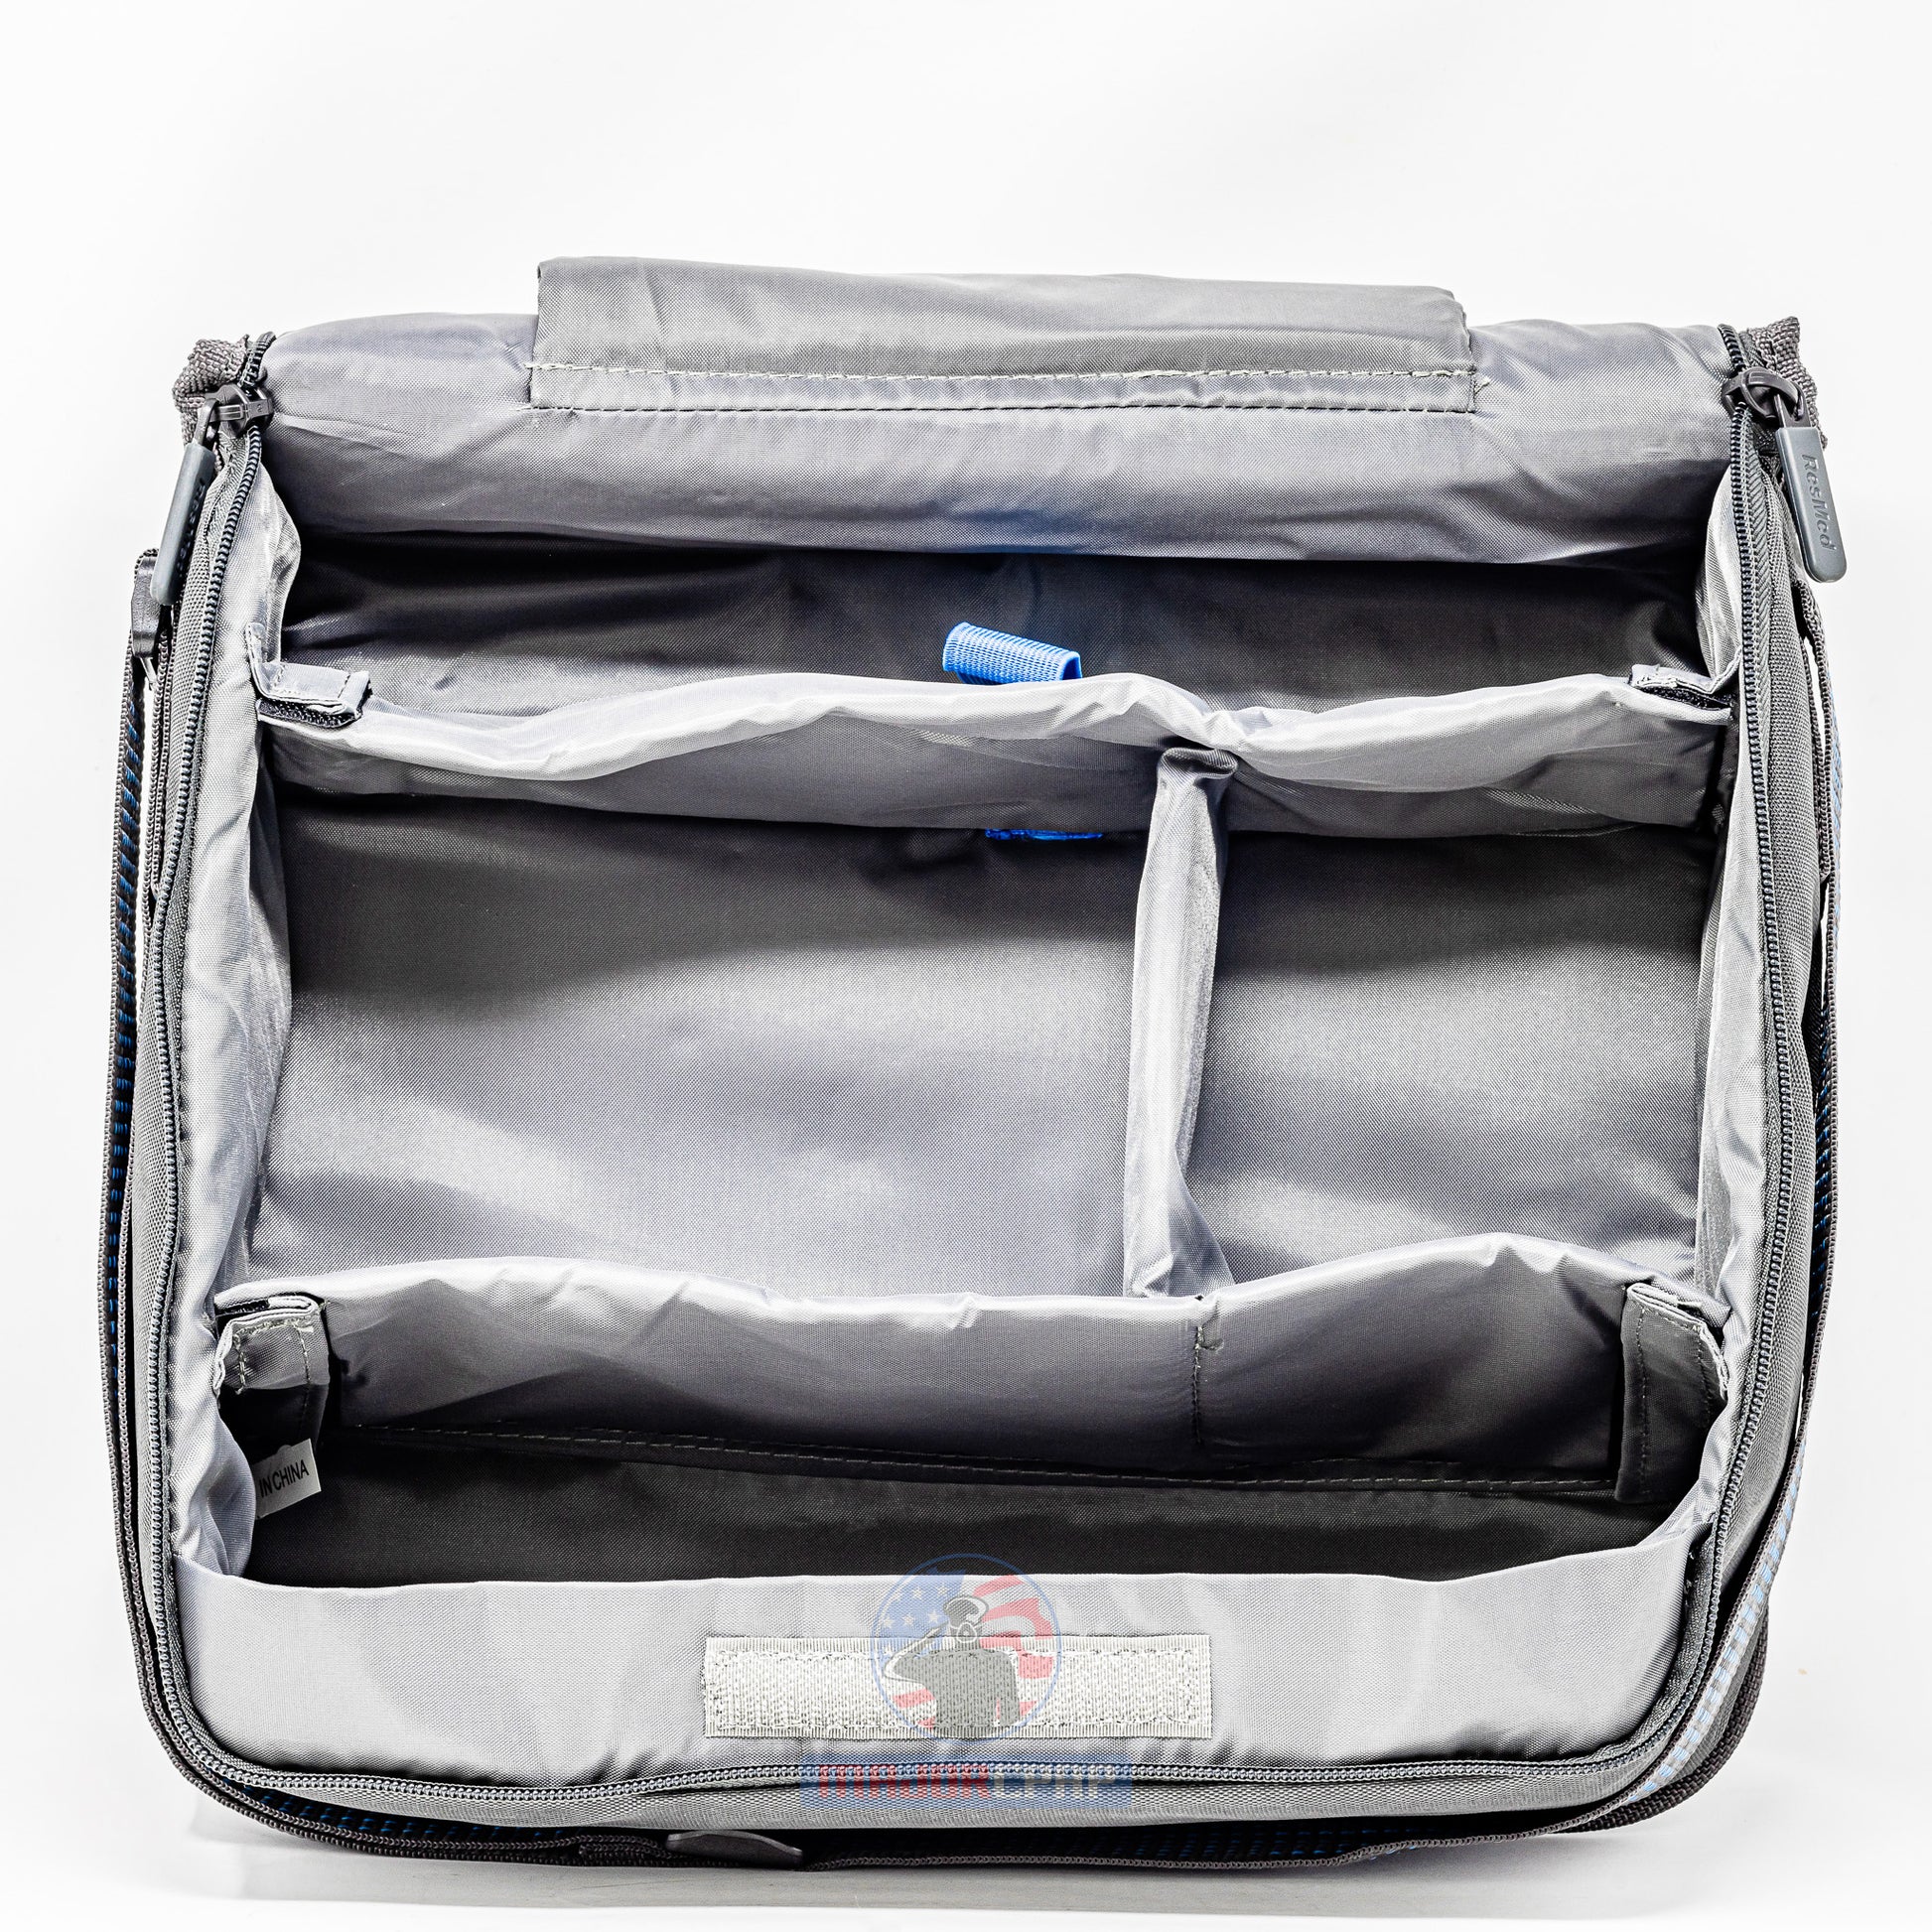 CPAP Carrying Case : Ships Free